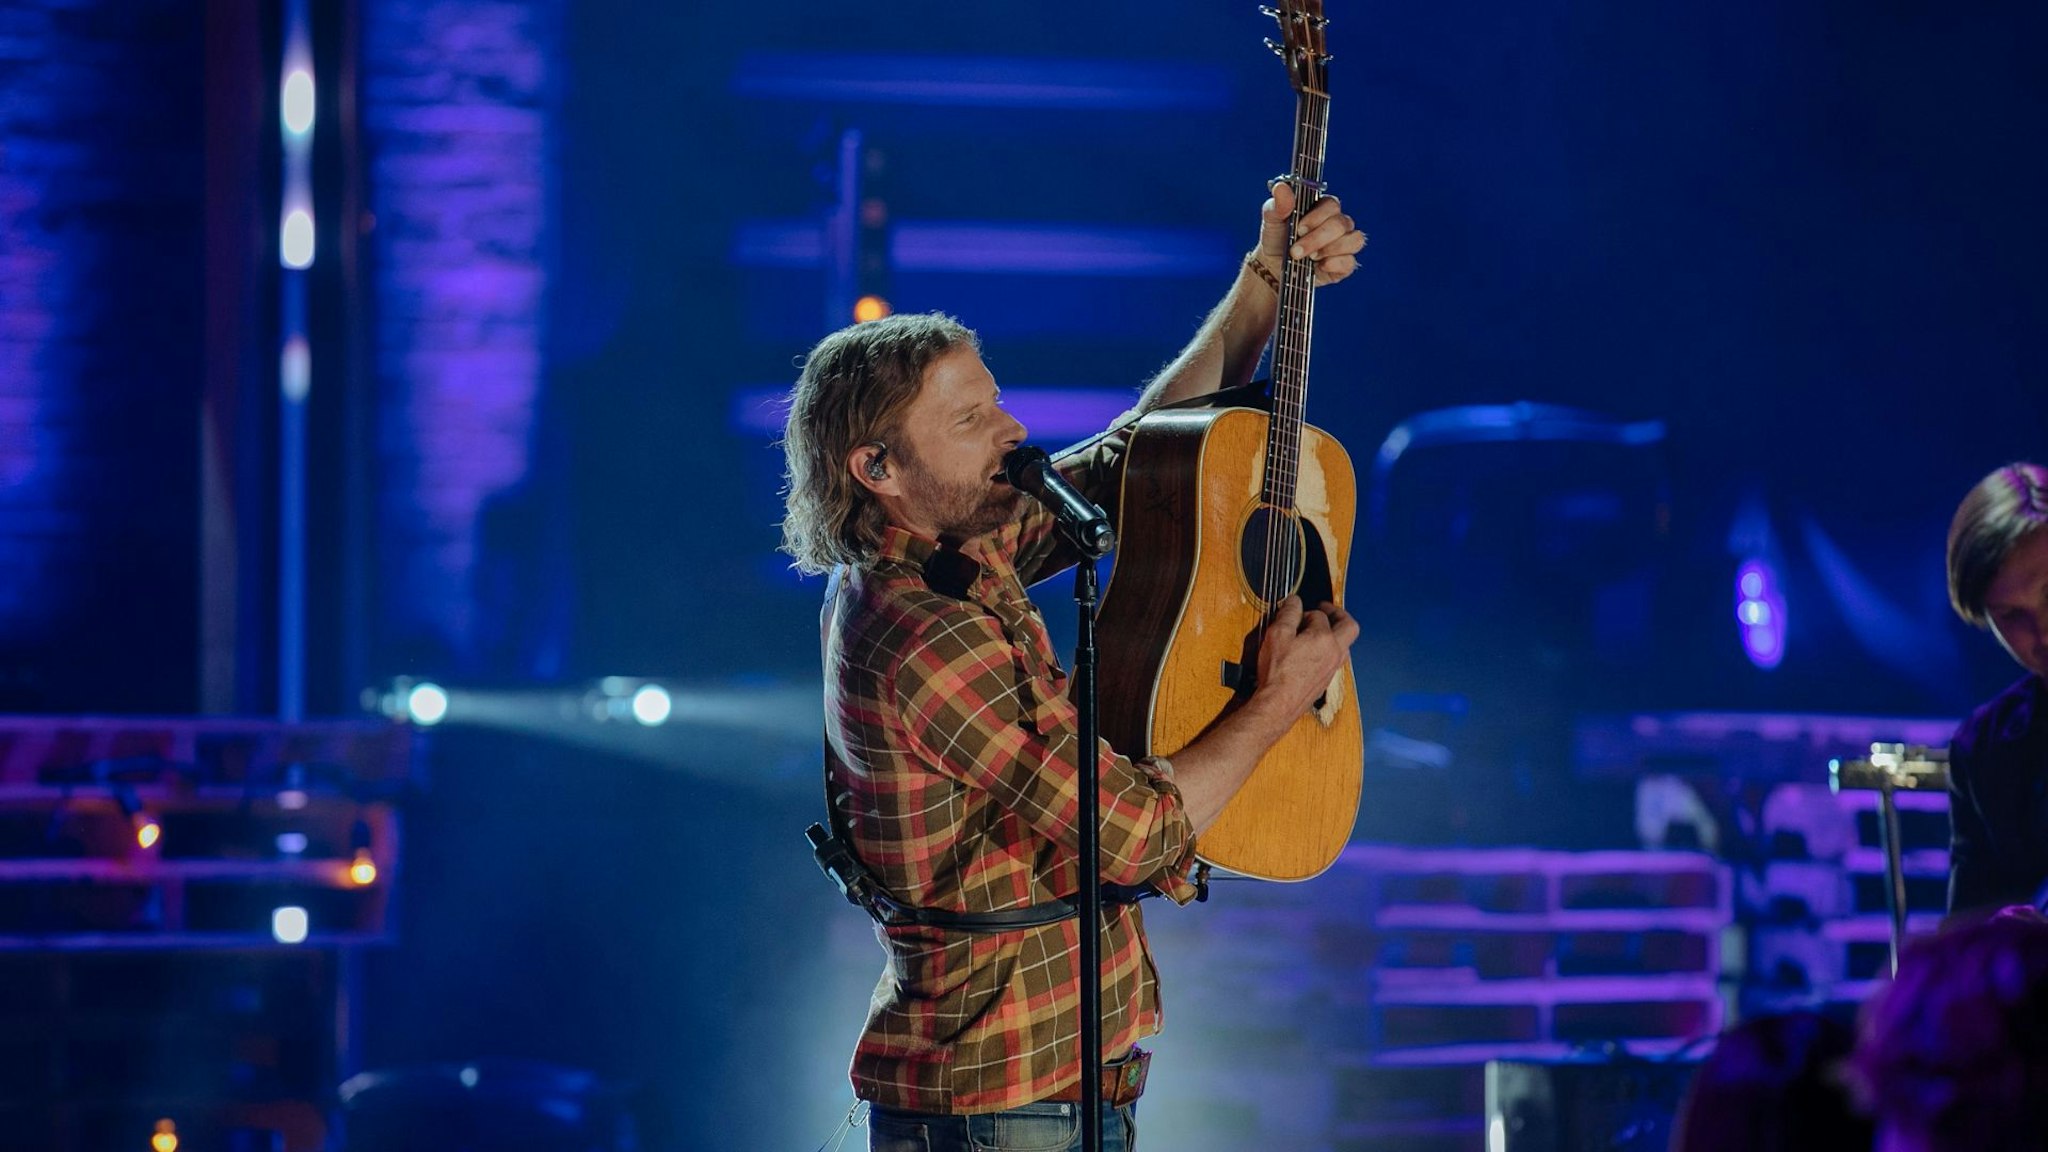 NASHVILLE, TENNESSEE: In this image released on March 29, Dierks Bentley performs at CMT Storytellers at Marathon Music Works in Nashville, Tennessee.